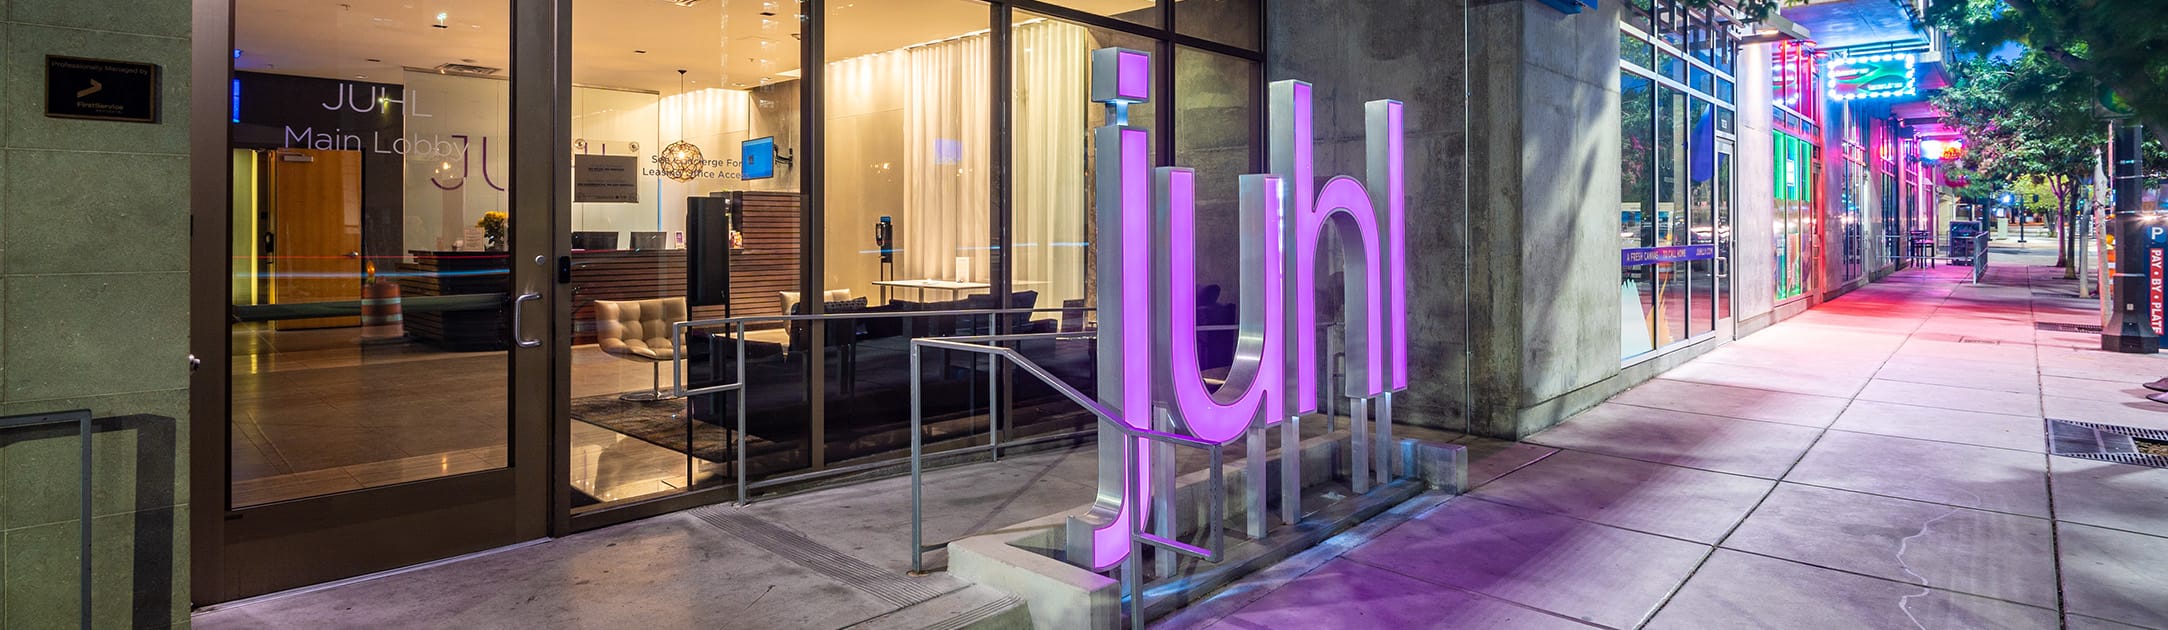 Sidewalk with a purple Juhl sign and entrance to the high rise.